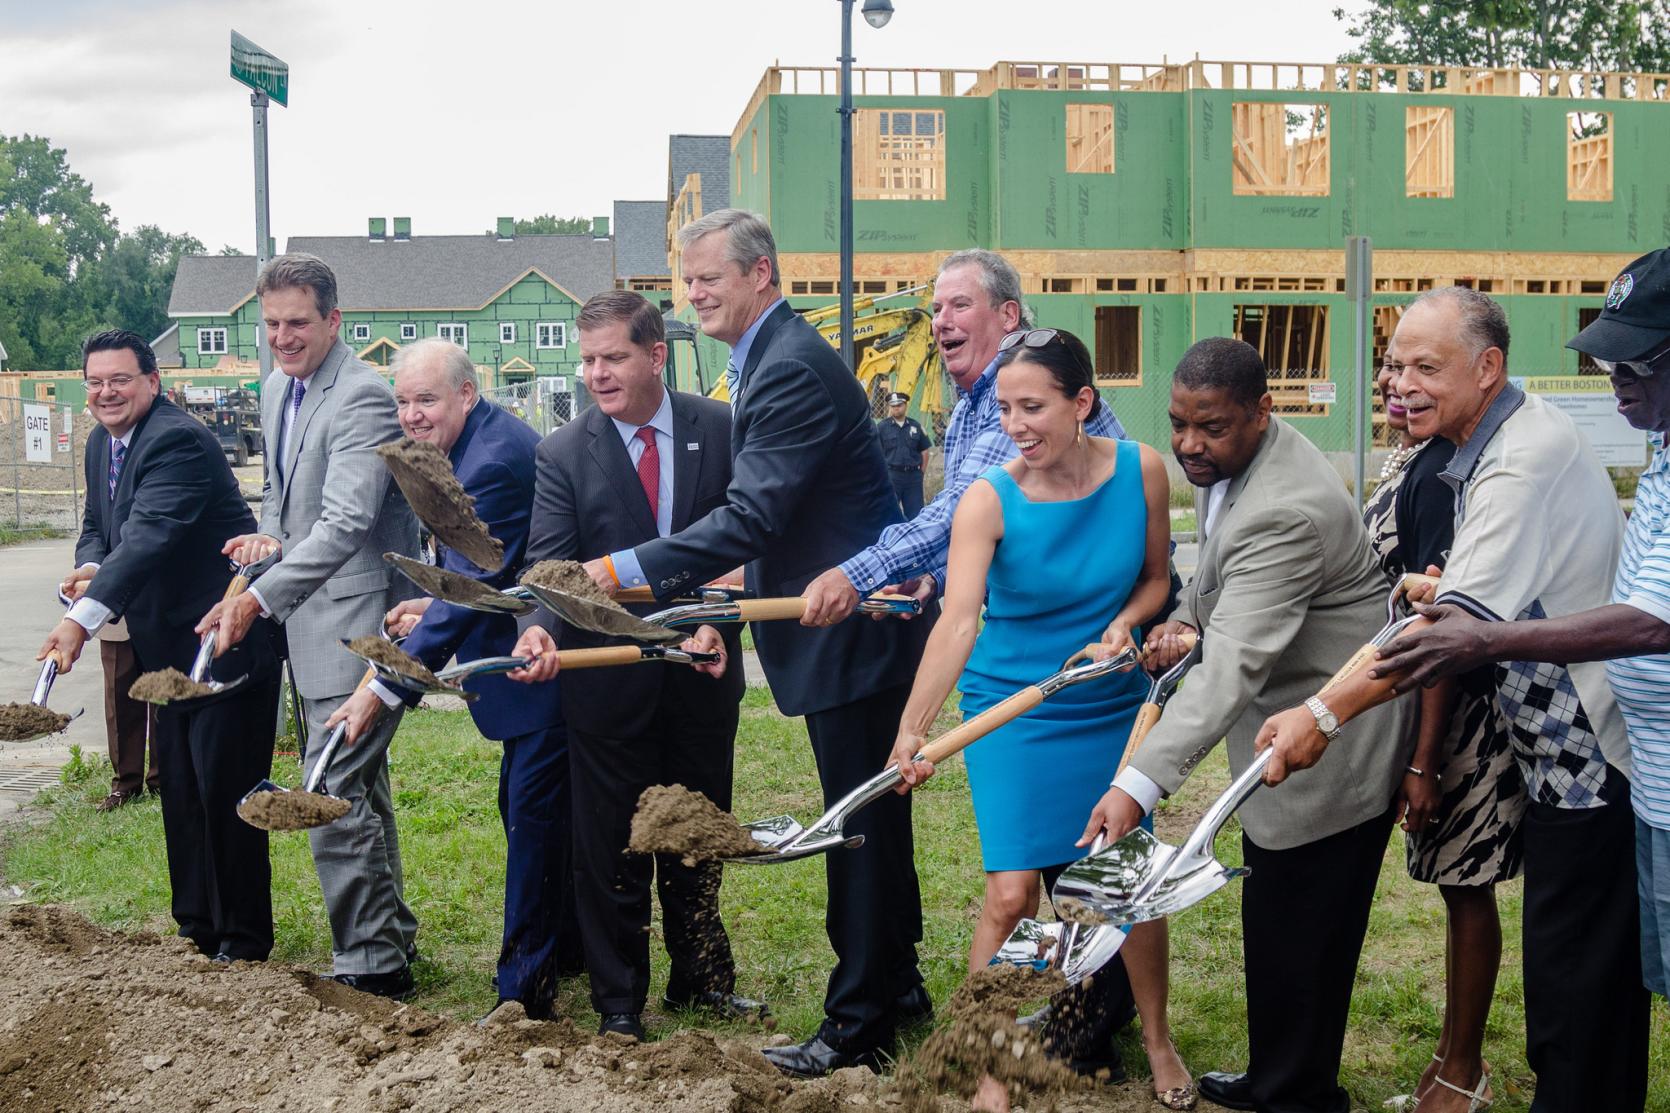 Governor Baker and others break ground on affordable housing in Boston.